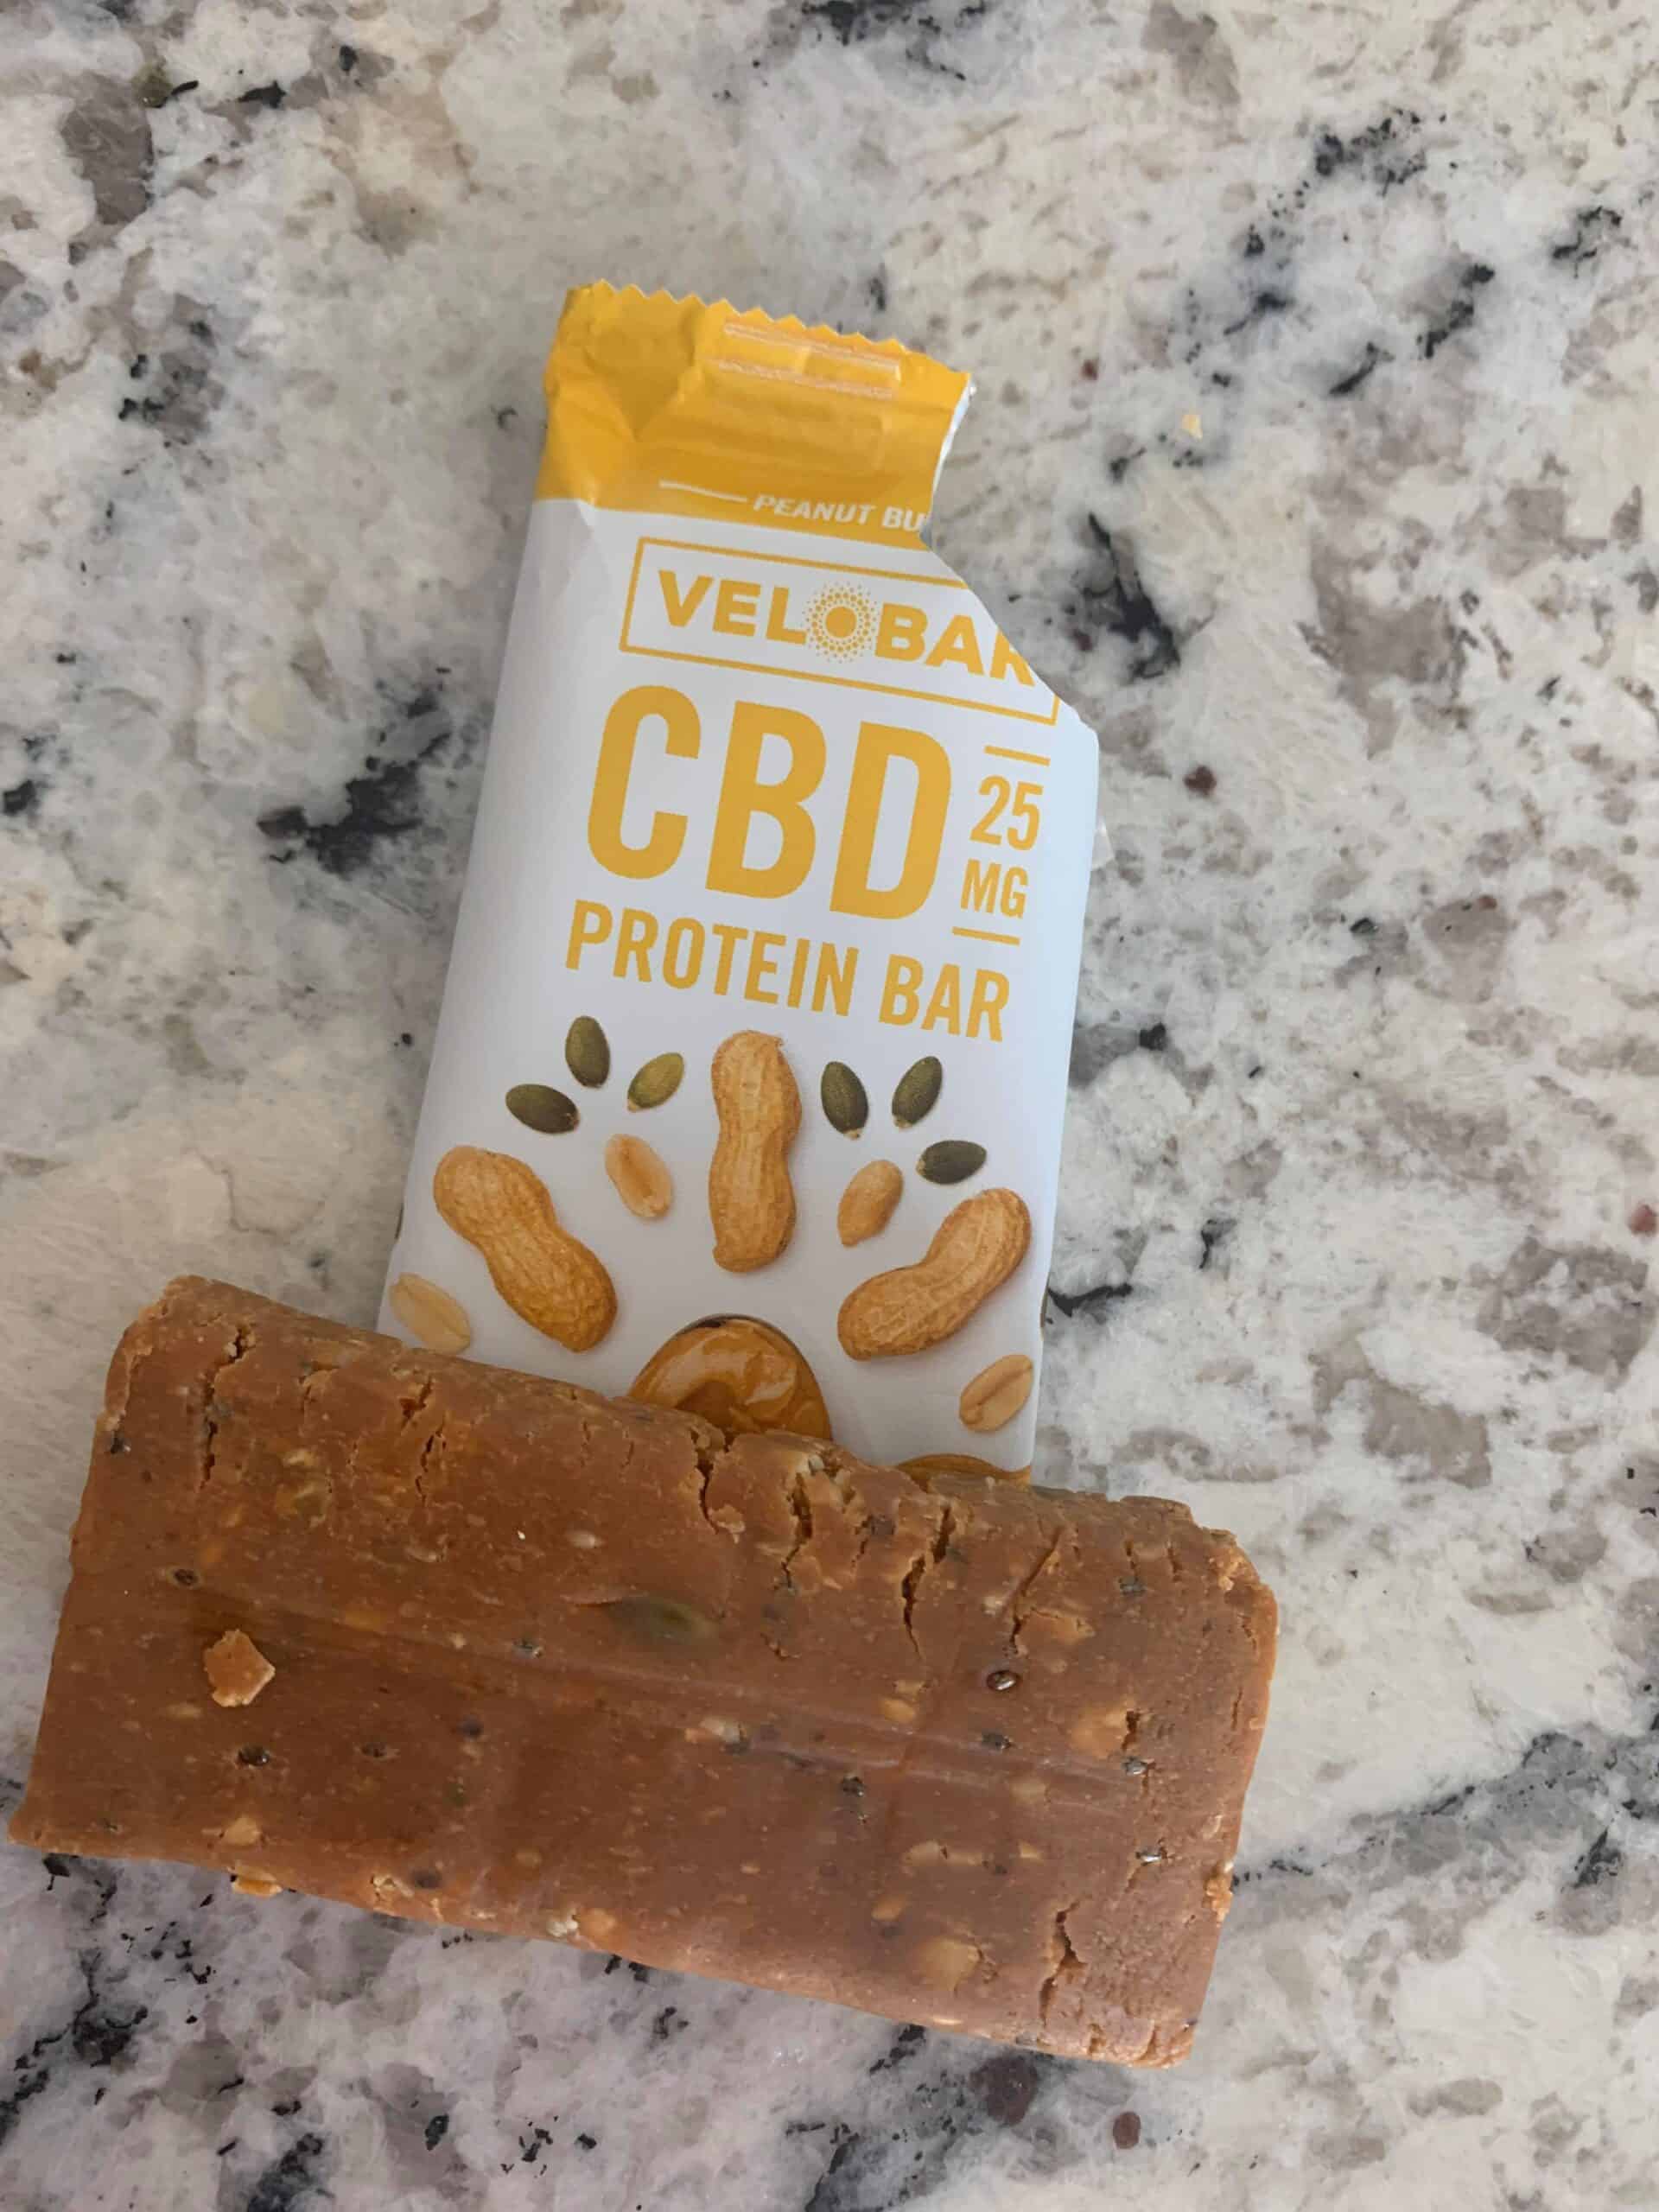 Velobar peanut butter review save on cannabis testing process